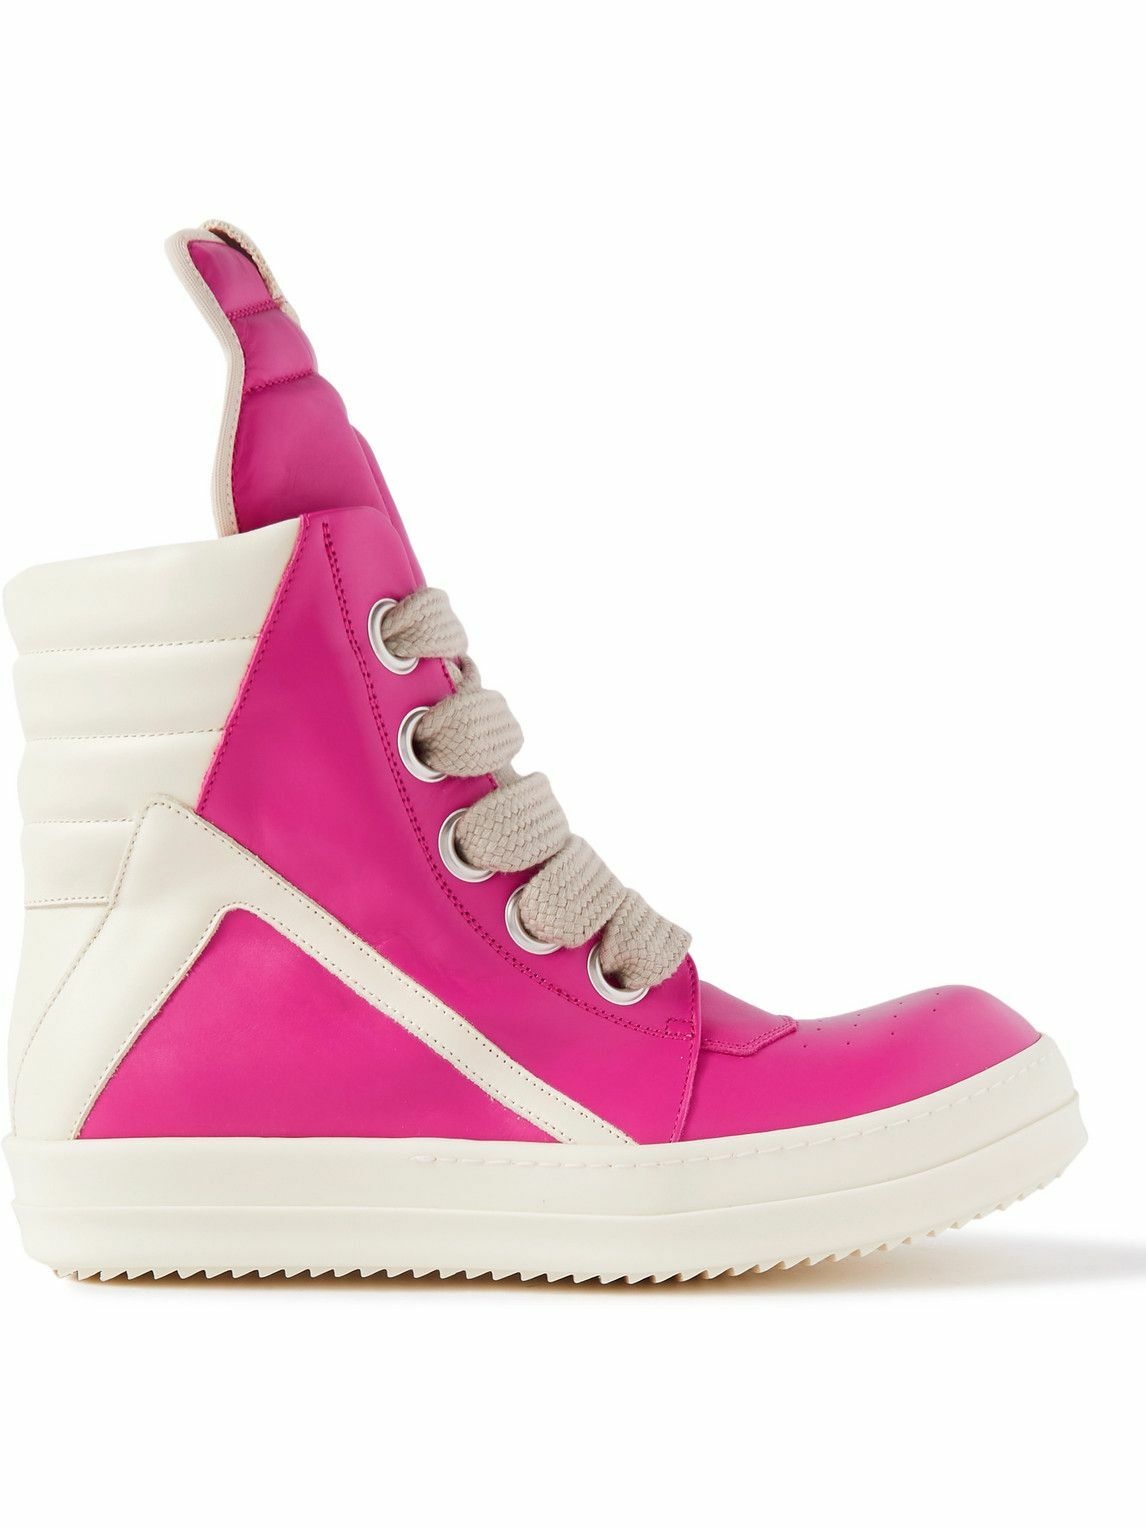 Rick Owens - Geobasket Two-Tone Leather High-Top Sneakers - Pink Rick Owens